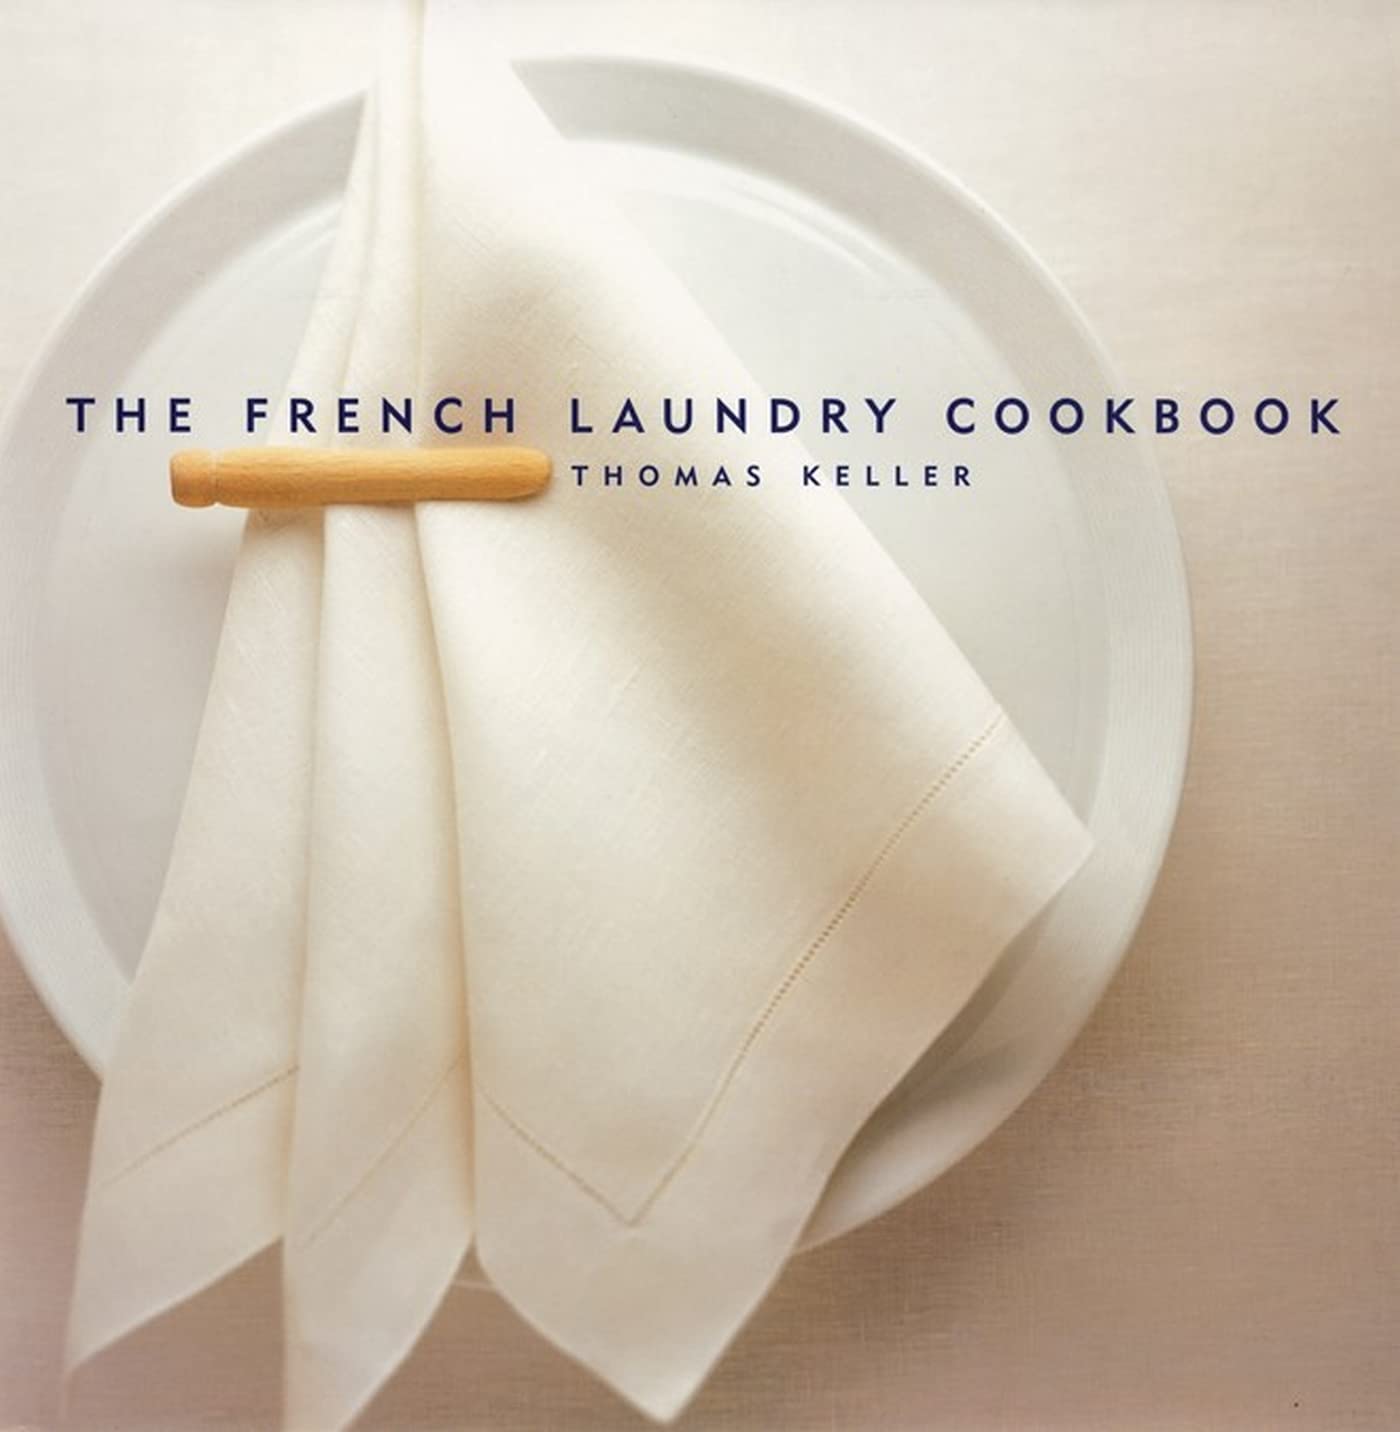 Book - The French Laundry Cookbook: Hardcover